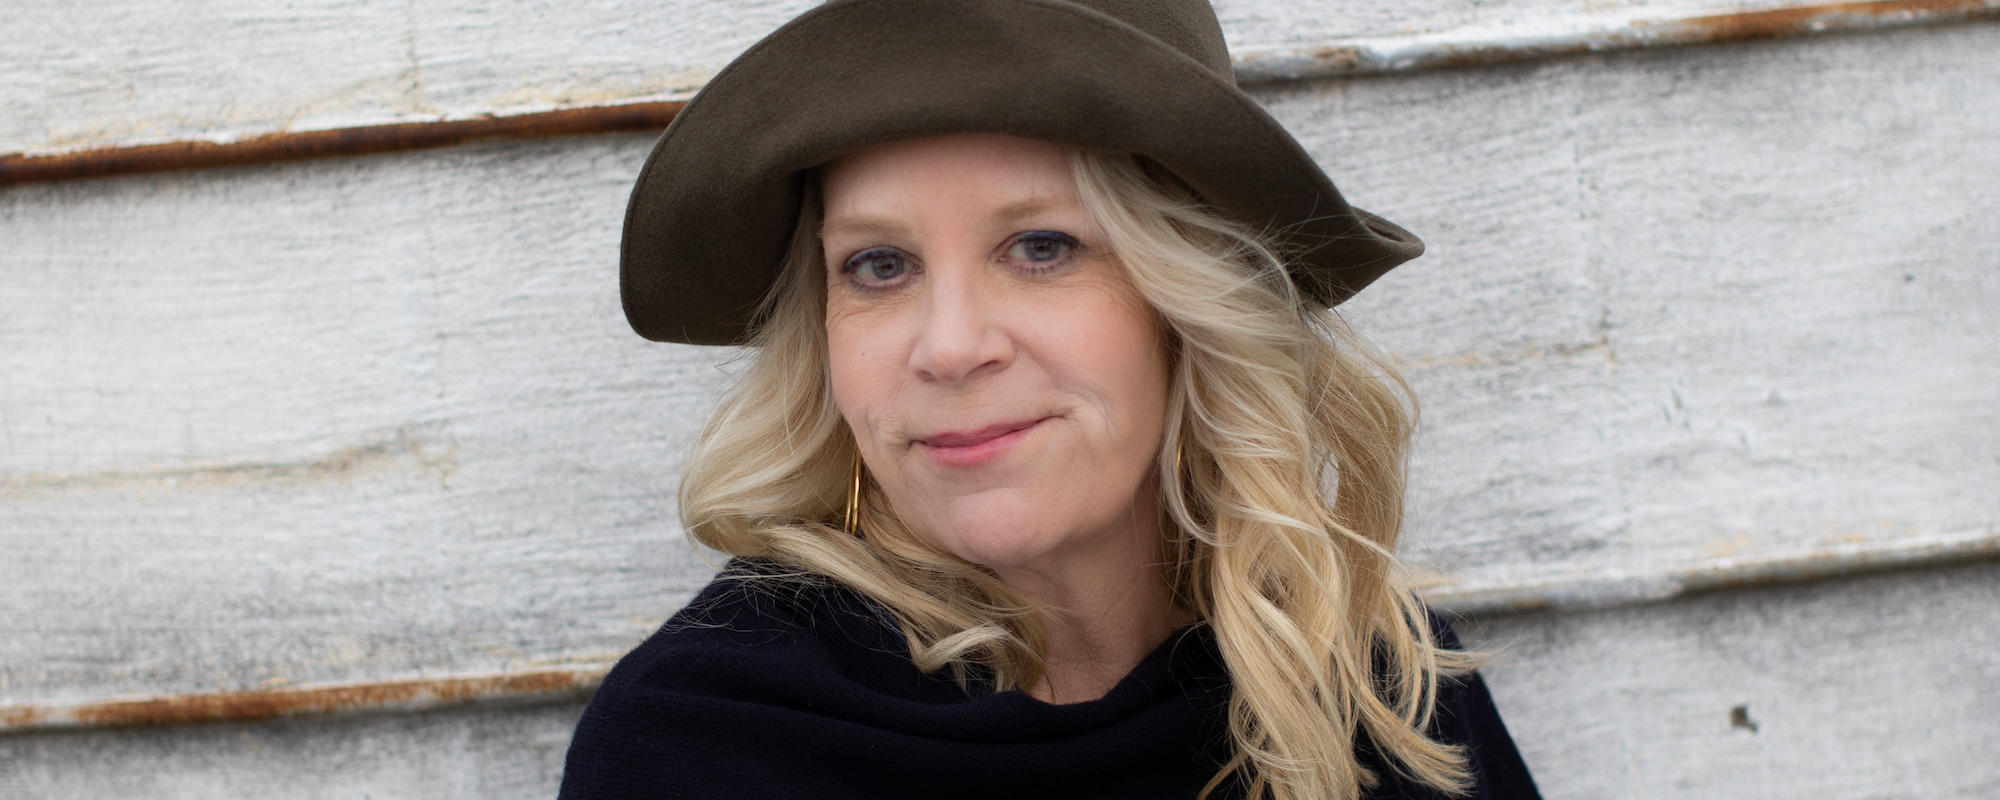 Mary Chapin Carpenter “Astonished” to Receive Poet’s Award at 2023 ACM Honors